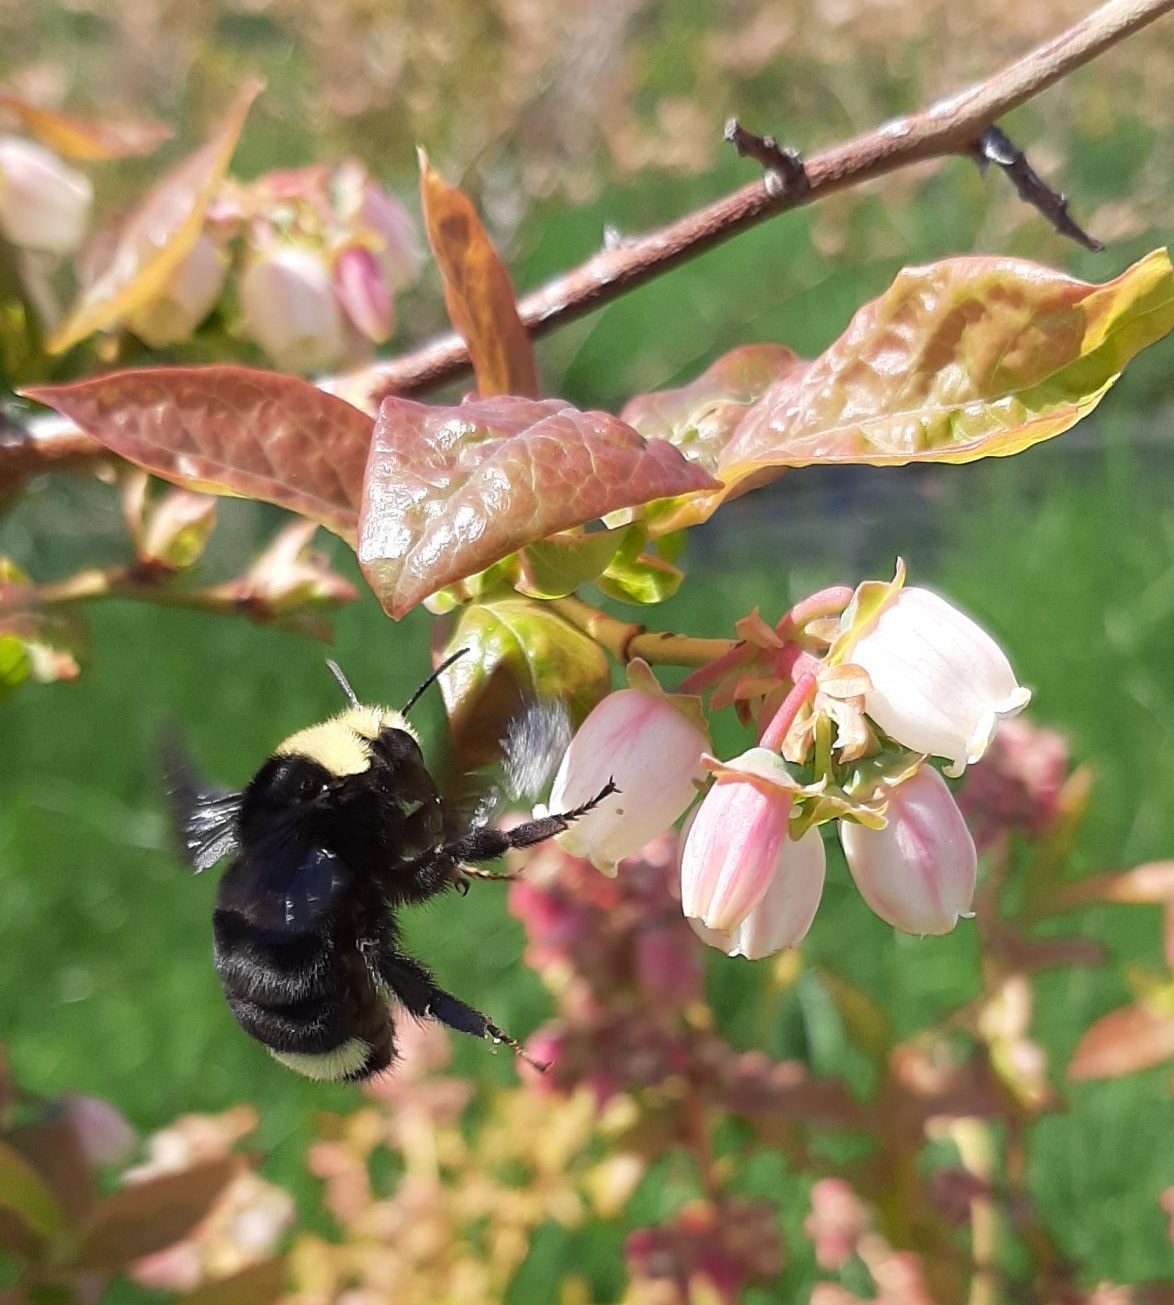 A bumble bee at a blueberry blossom